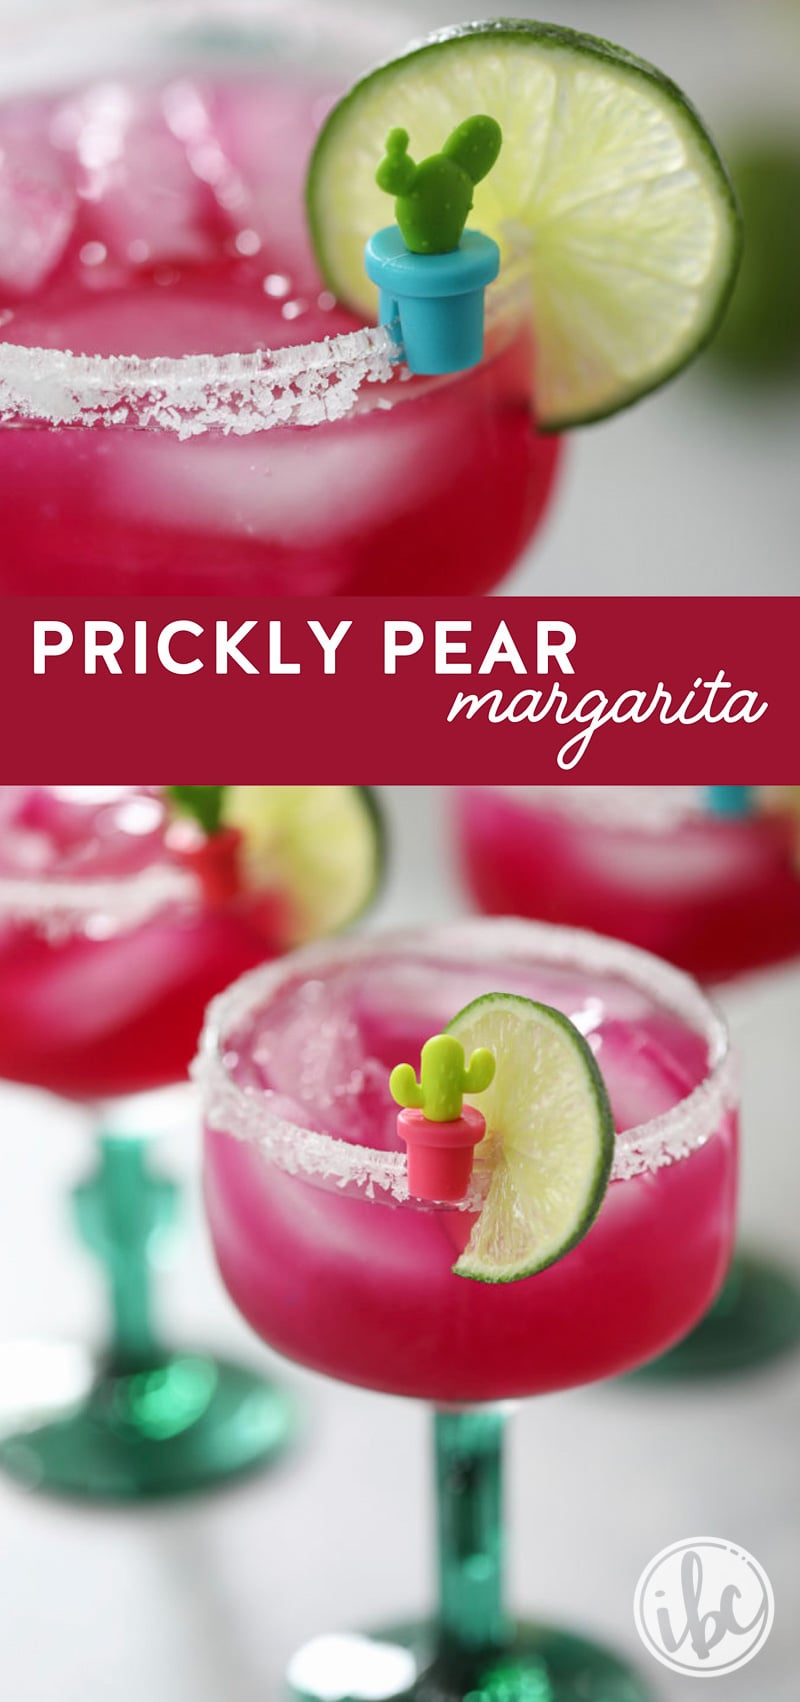 This Prickly Pear Margarita is a delicious and fun as it looks! #cocktail #margarita #recipe #prickly #pear